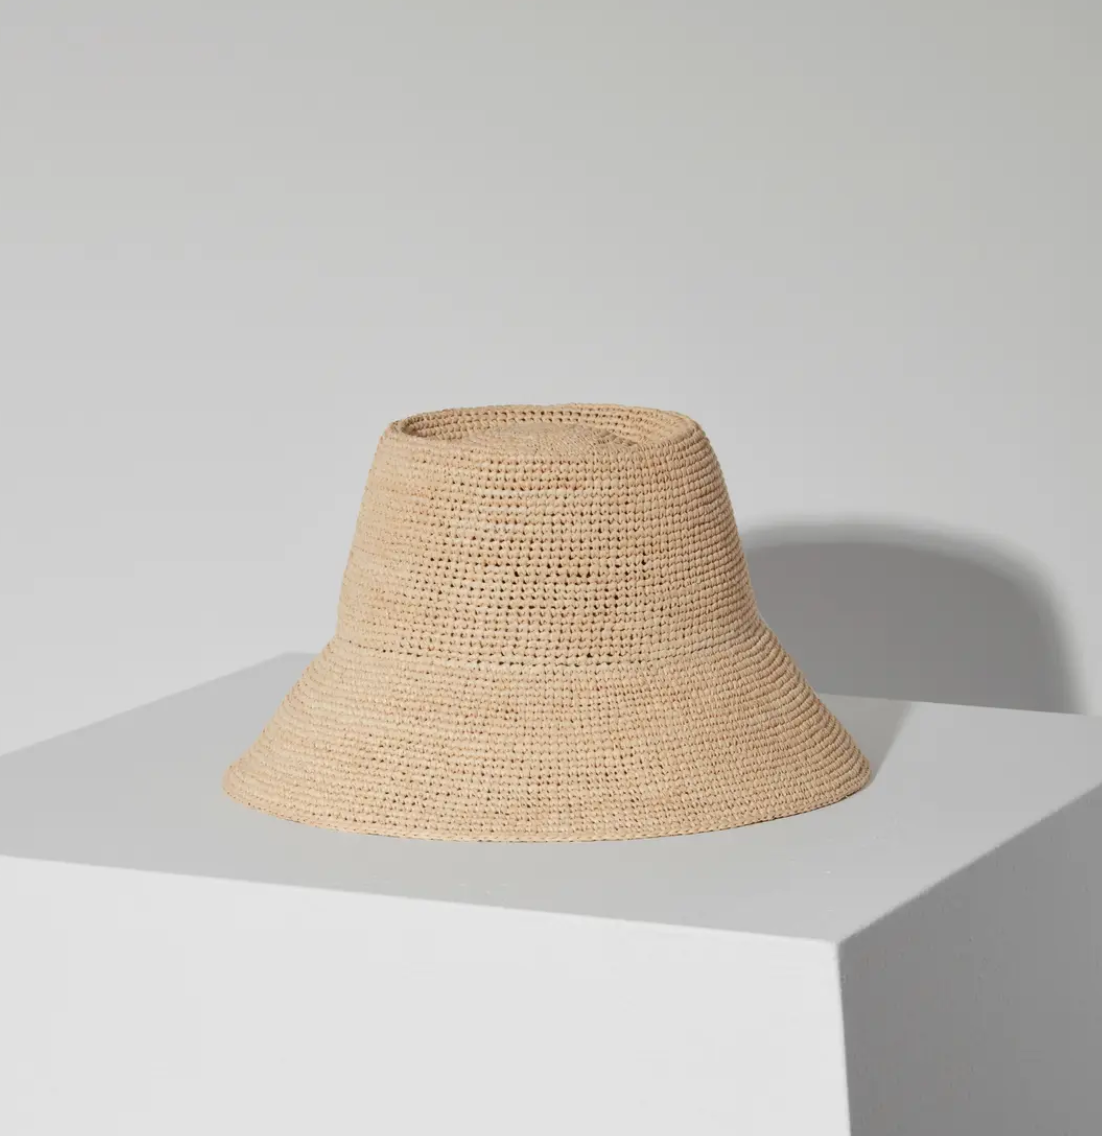 A Felix Bucket Natural hat by Janessa Leone rests on a white cube under soft lighting, casting a gentle shadow to the right, against a plain white background.